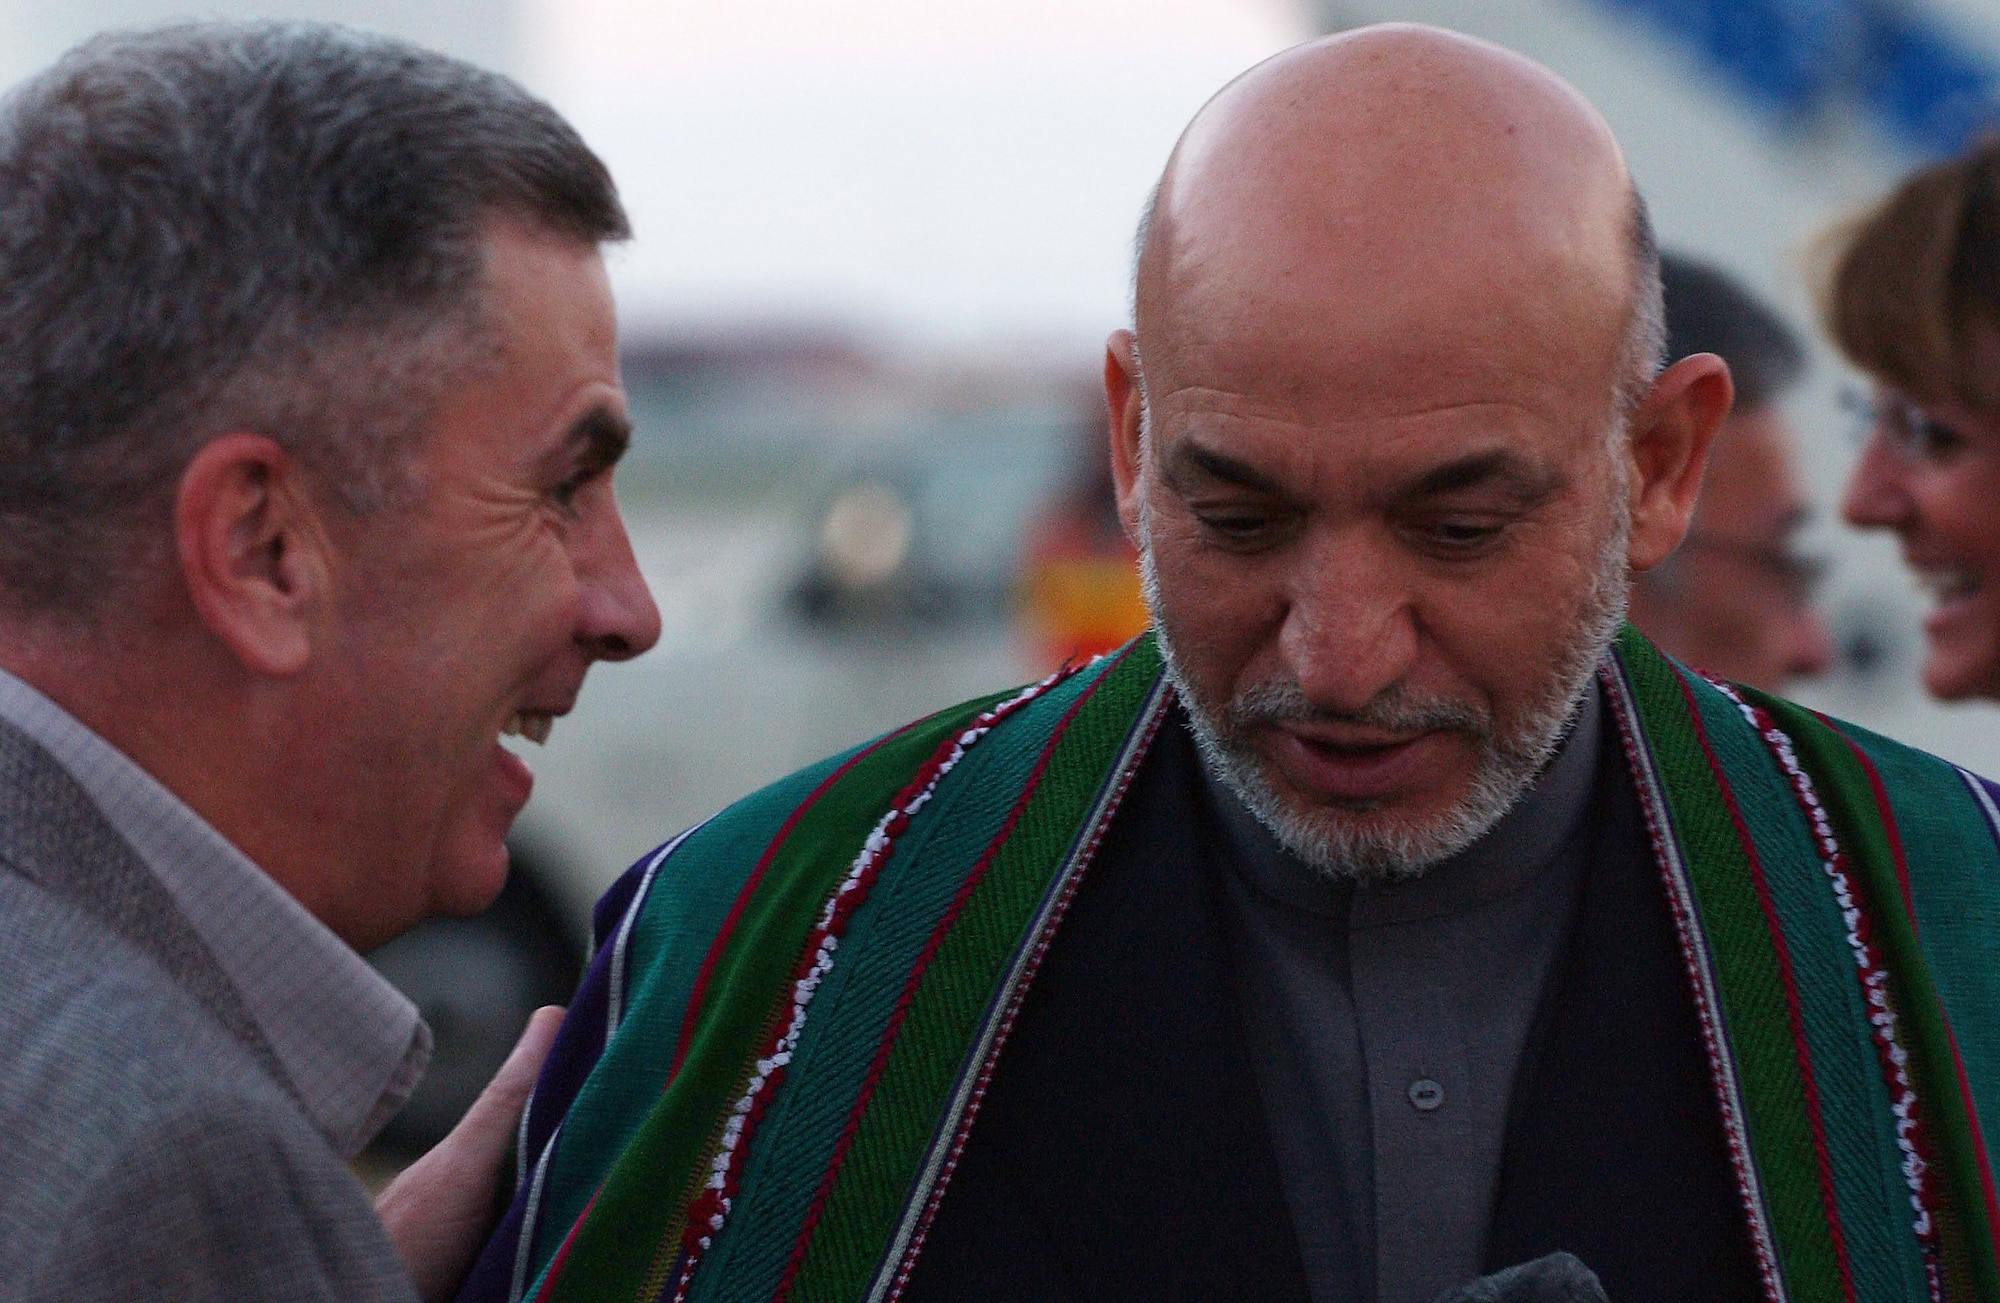 Afghanistan's President Hamid Karzai (right) talks with Army Gen. John Abizaid Sept. 26 shortly after landing at MacDill Air Force Base in Tampa, Fla. President Karzai visited with General Abizaid, the commander of United States Central Command, during his visit to the United States this week. (U.S. Air Force photo/Senior Airman Jason Robertson)

